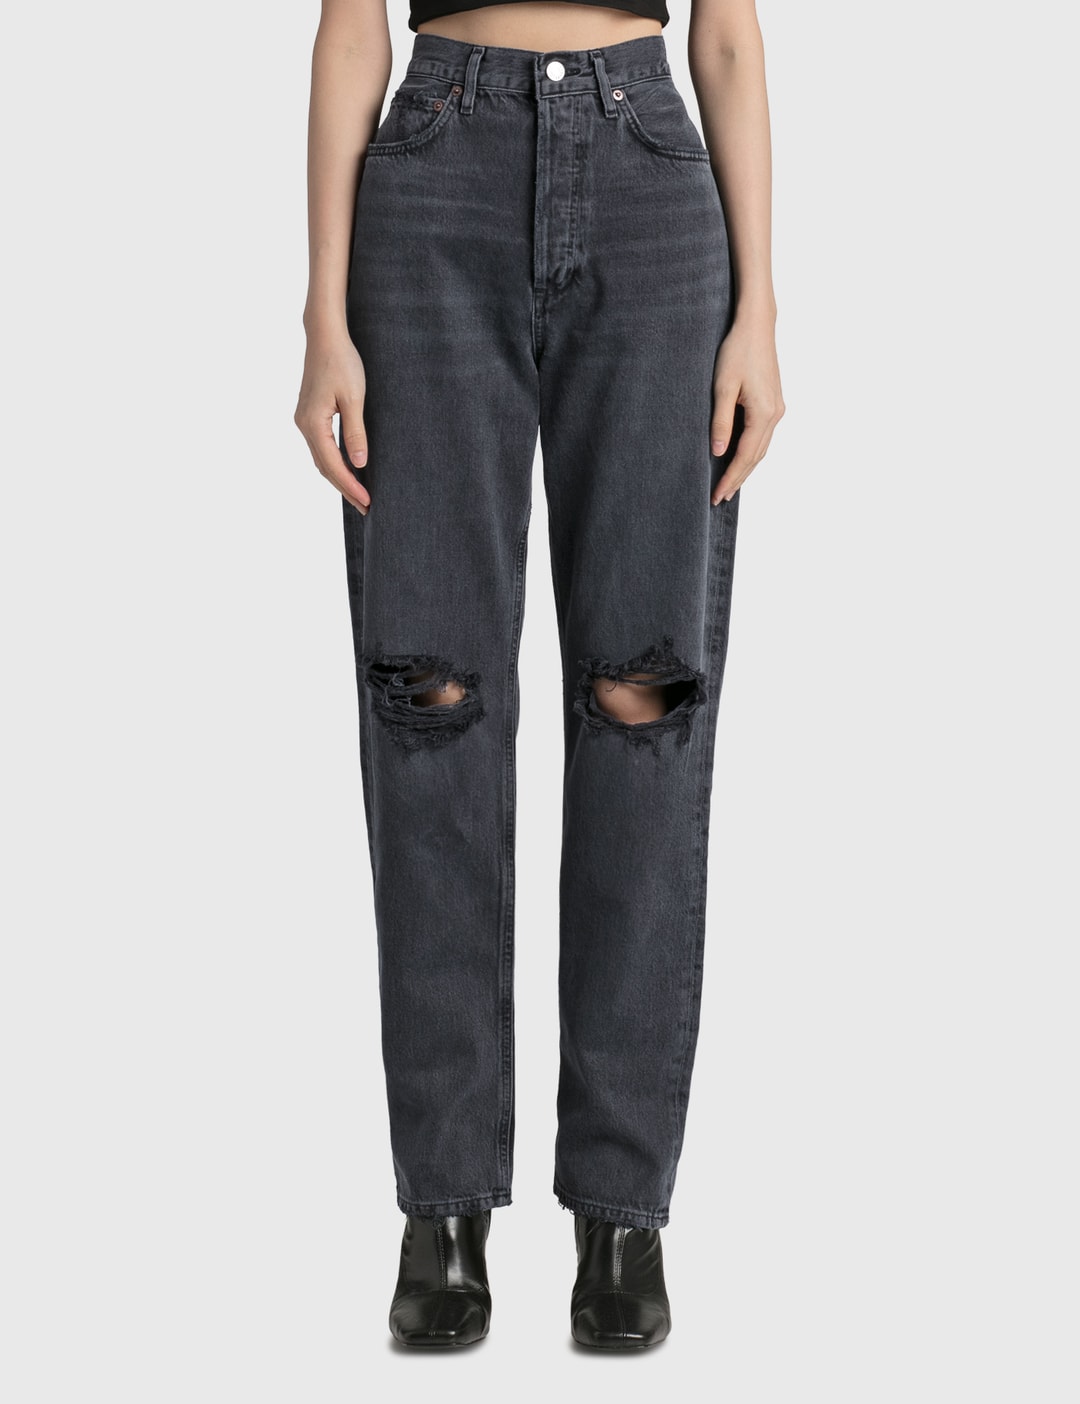 AGOLDE - 90's Pinch Waist Jeans | HBX - Globally Curated Fashion and ...